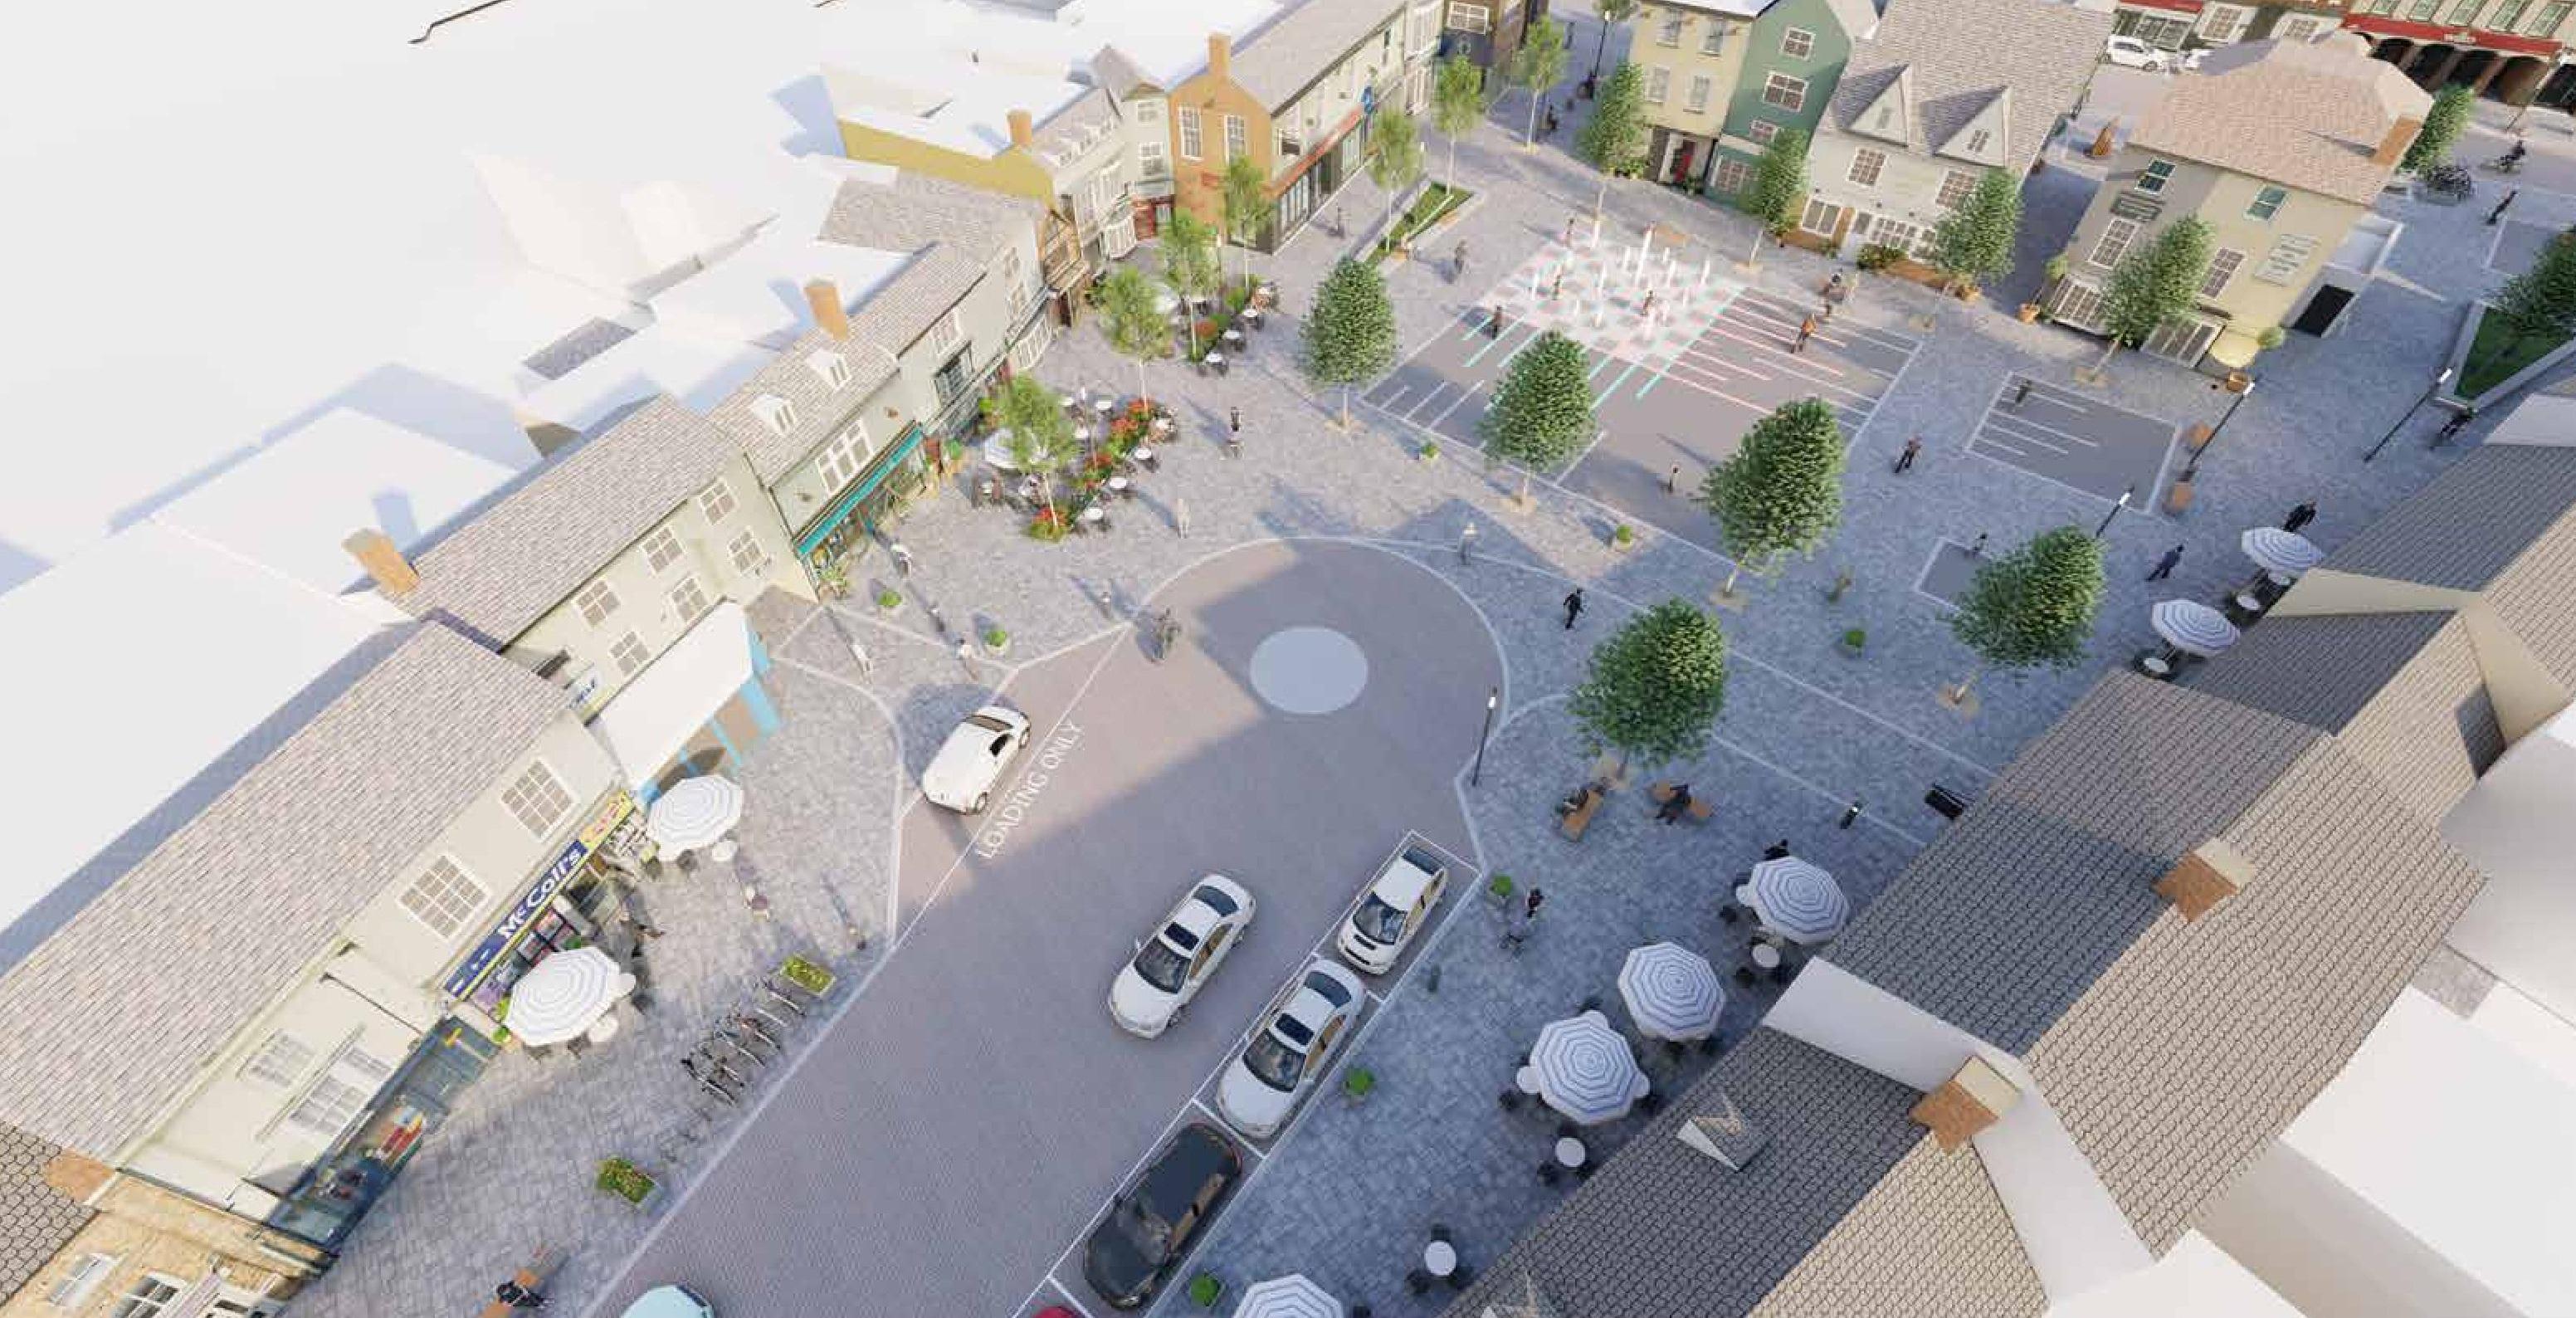 An aerial view of what the transformed Bicester Market Square could look like